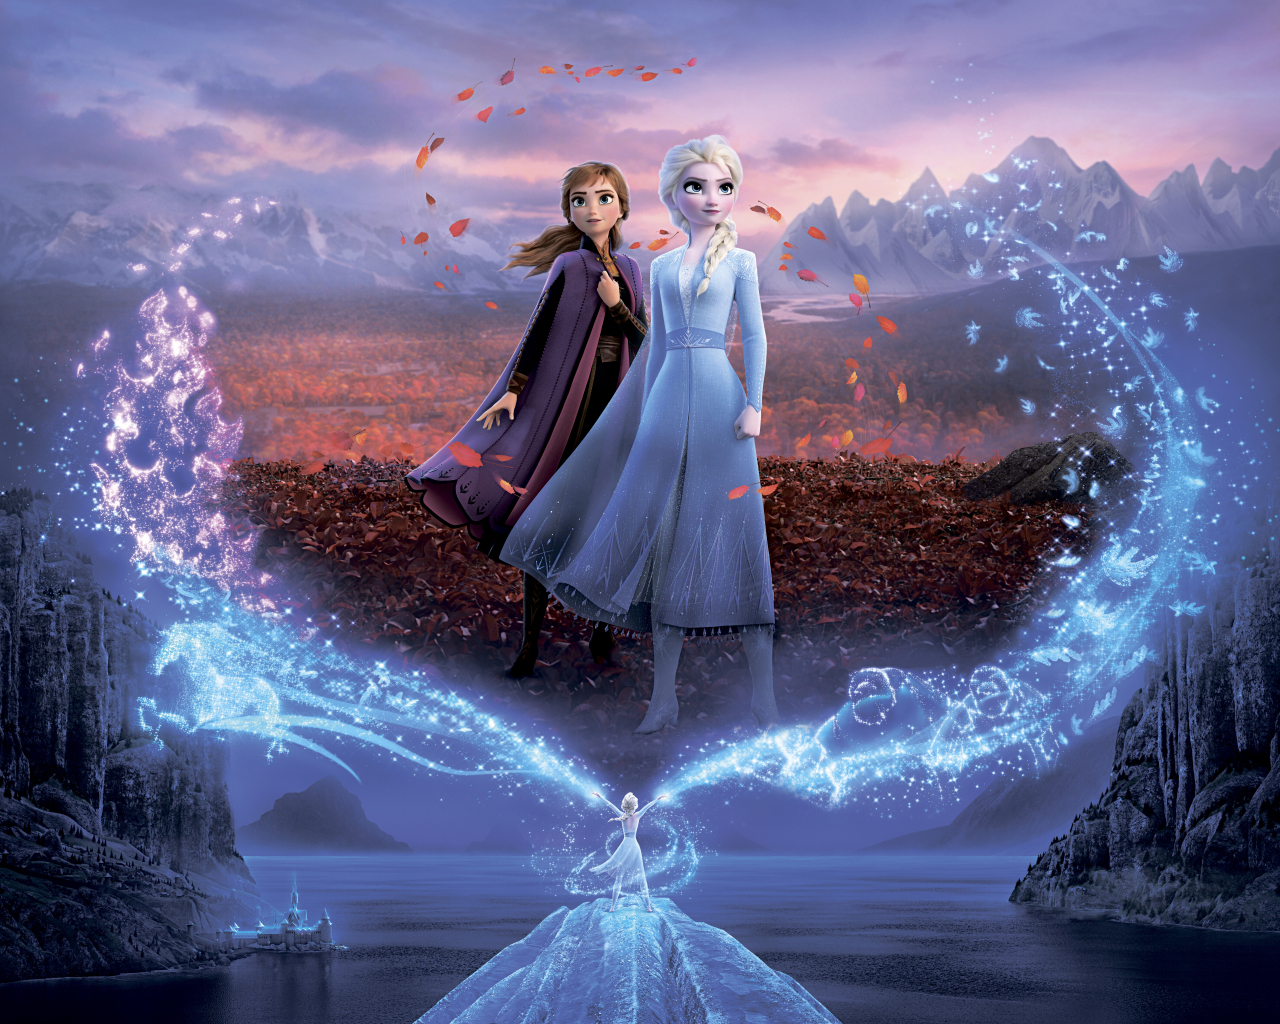 Download wallpaper 1280x1024 frozen 2, royal sisters, movie, poster ...